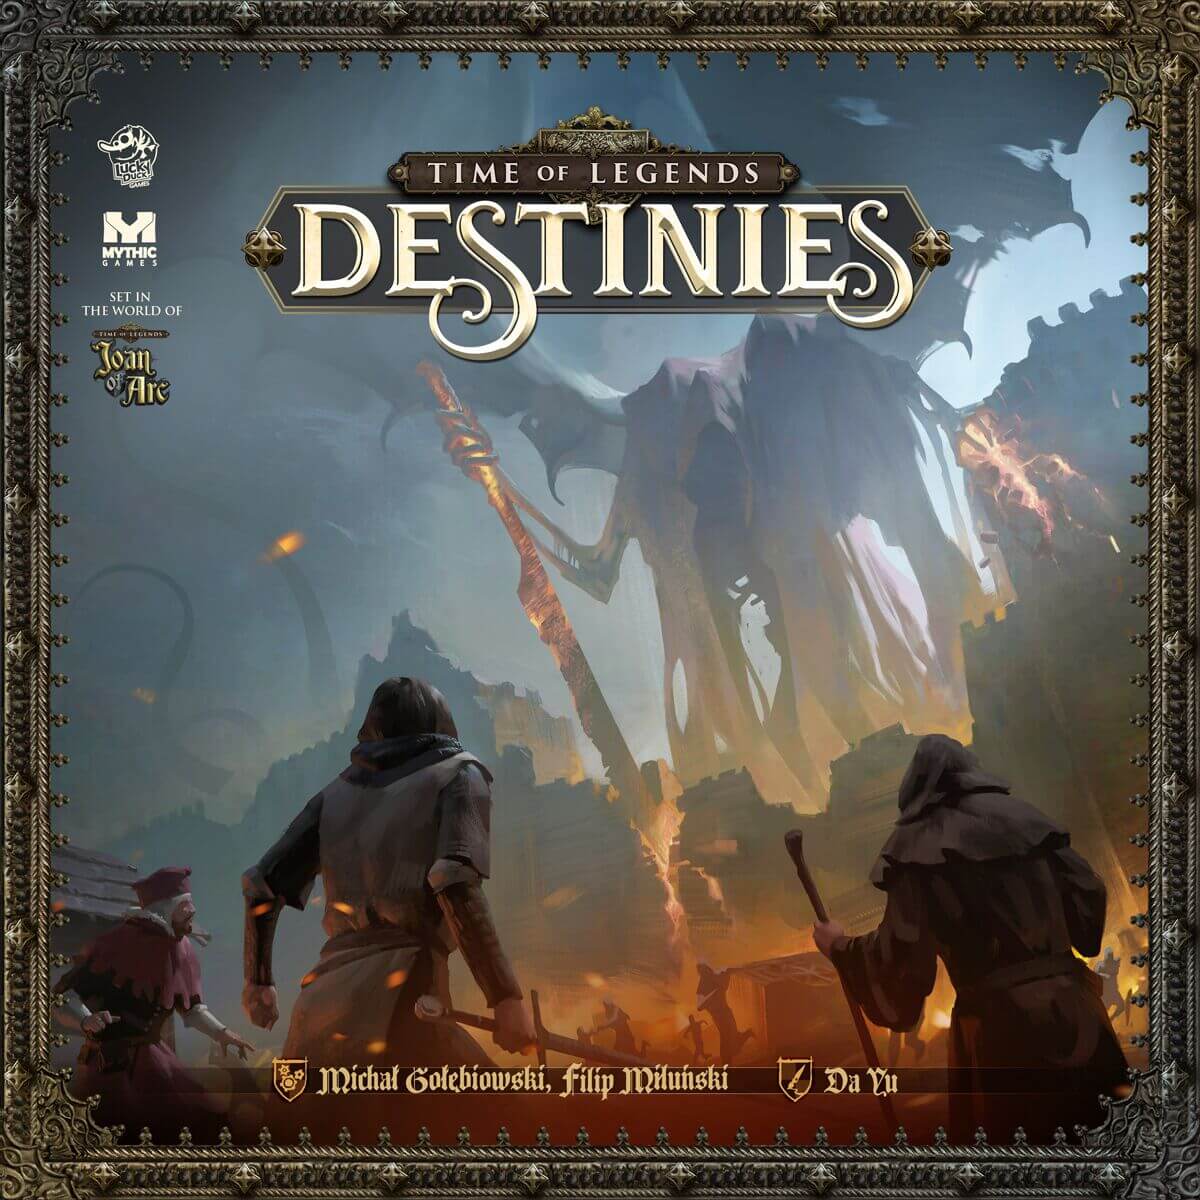 10 x MAP TILES /DESTINIES/TIME OF LEGENDS/JOAN OF ARC/G169 